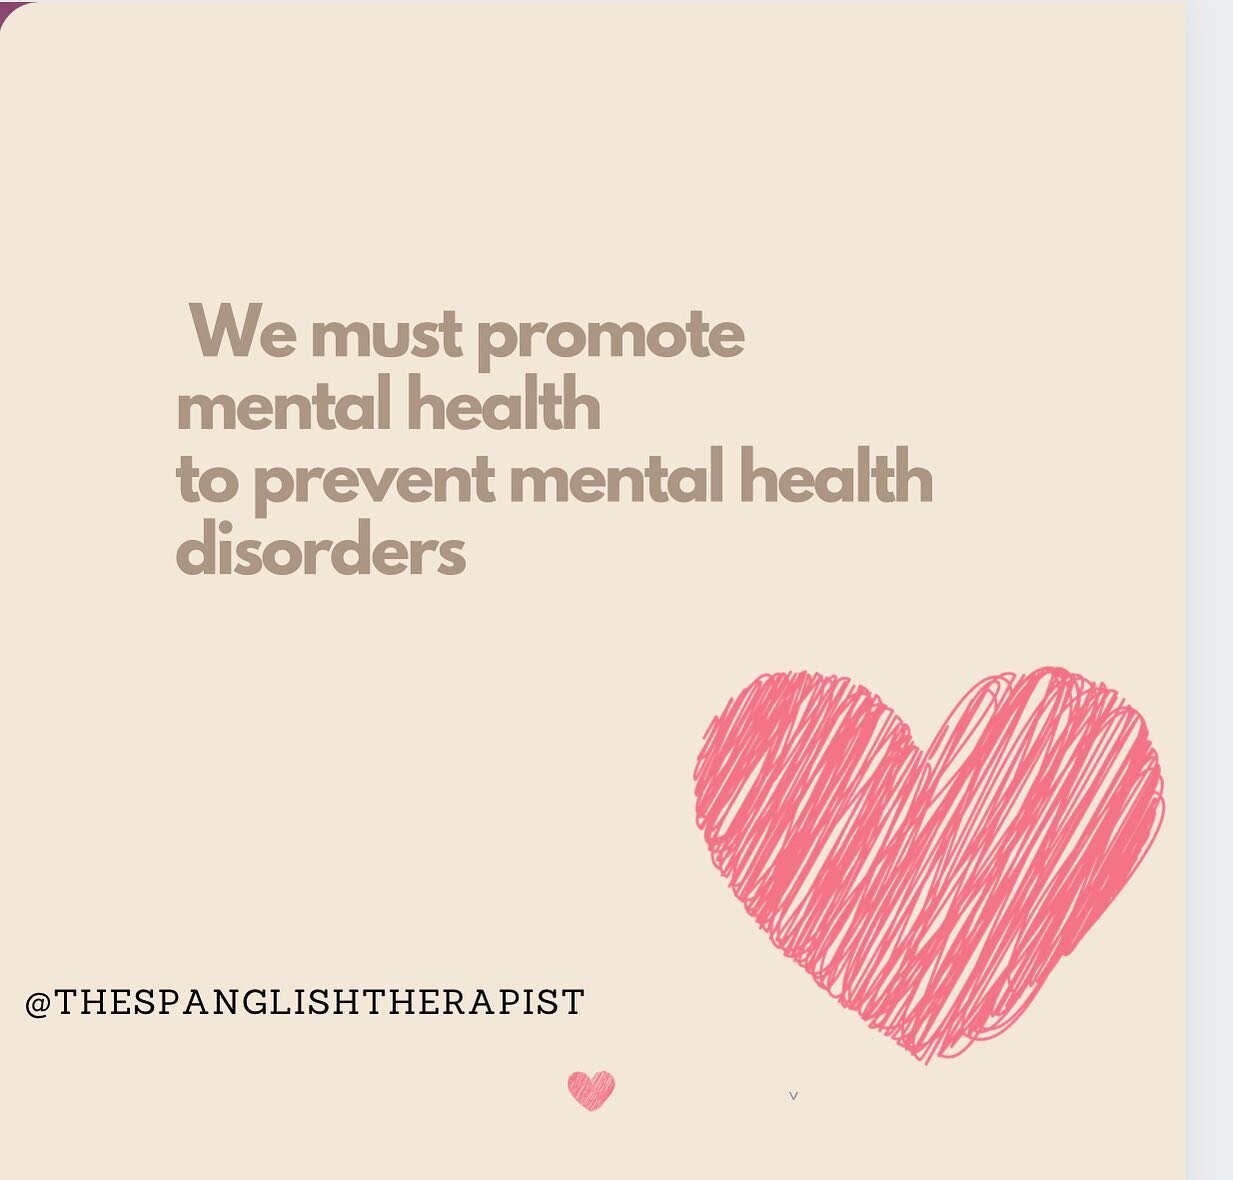 Now more than ever we must break the mental health stigma that causes so many to suffer in silence. We must change the narrative and normalize struggling during various stages of our lives. We must provide education and increase understanding of how 